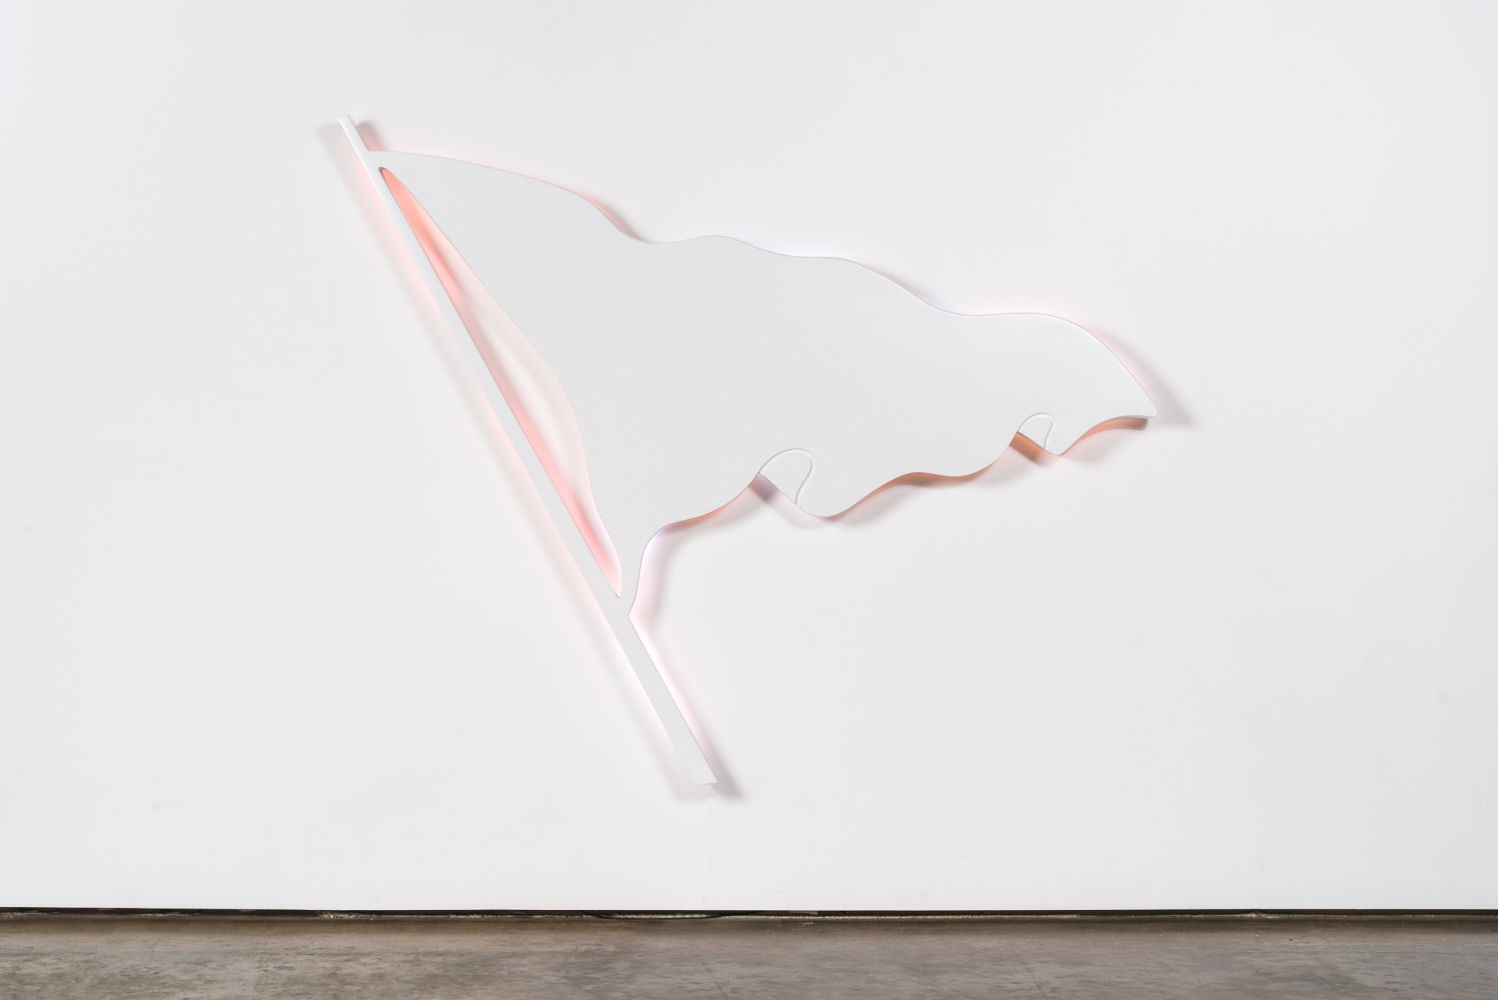 Doug Aitken

Flag (without borders)

2019

Hand-carved foam, fiberglass, resin, LEDs

84 x 104 1/4 x 6 inches&amp;nbsp;

(213.4 x 264.8 x 15.2 cm)

Variation&amp;nbsp;of 4, with 2 AP

DA 472

&amp;nbsp;

INQUIRE